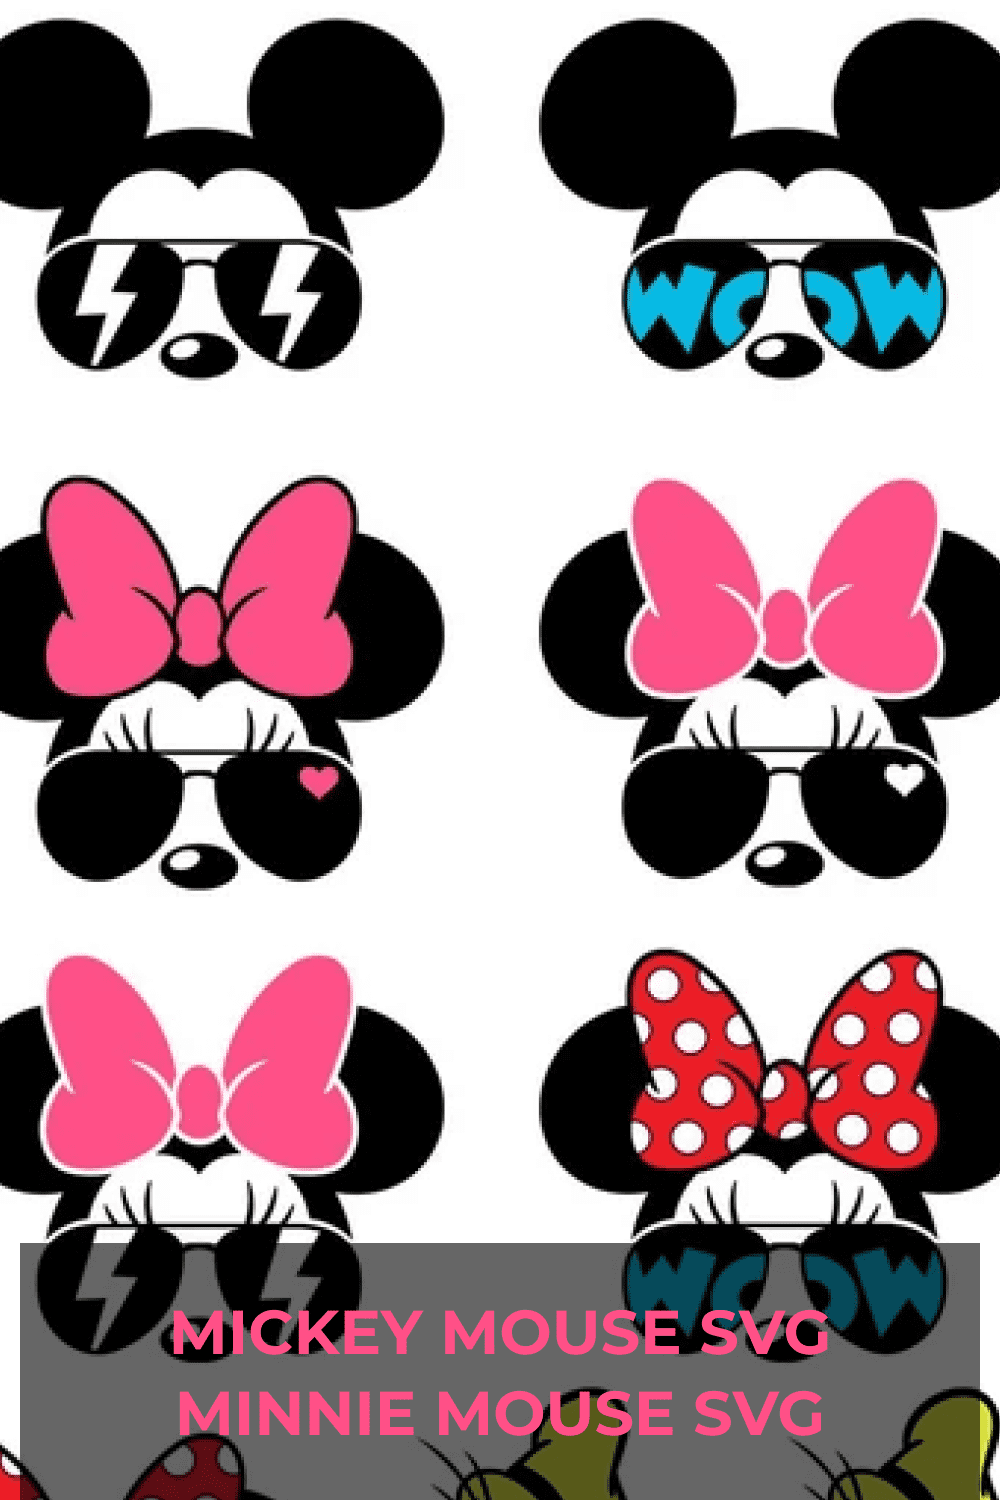 Mickey Mouse illustrations.